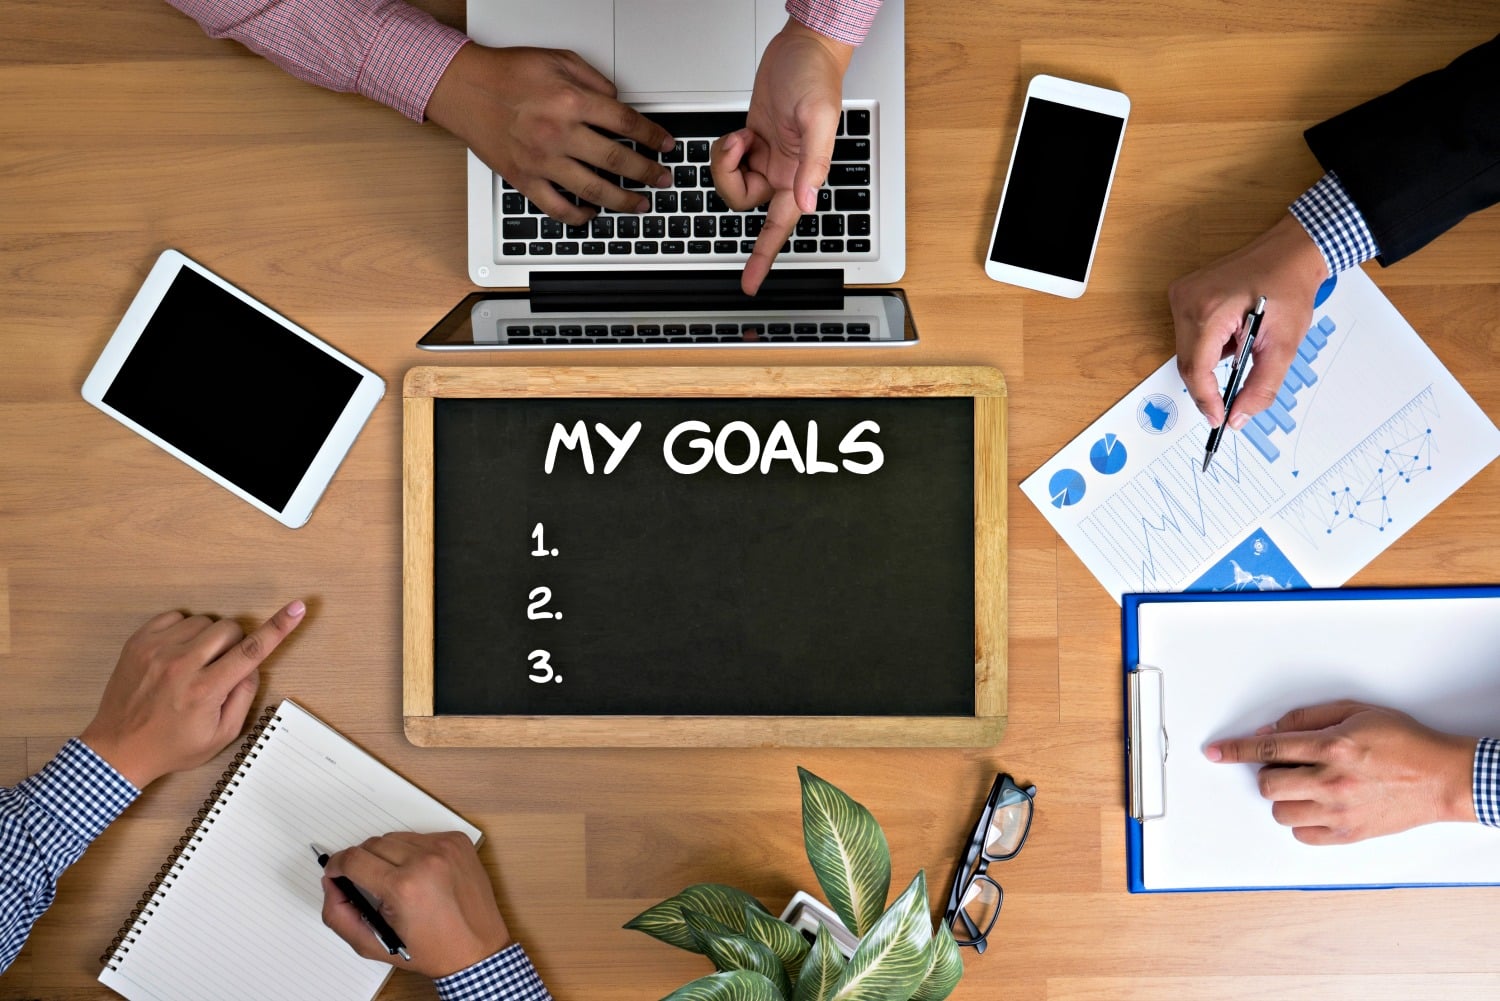 Meeting The Goals You Set With Relative Ease